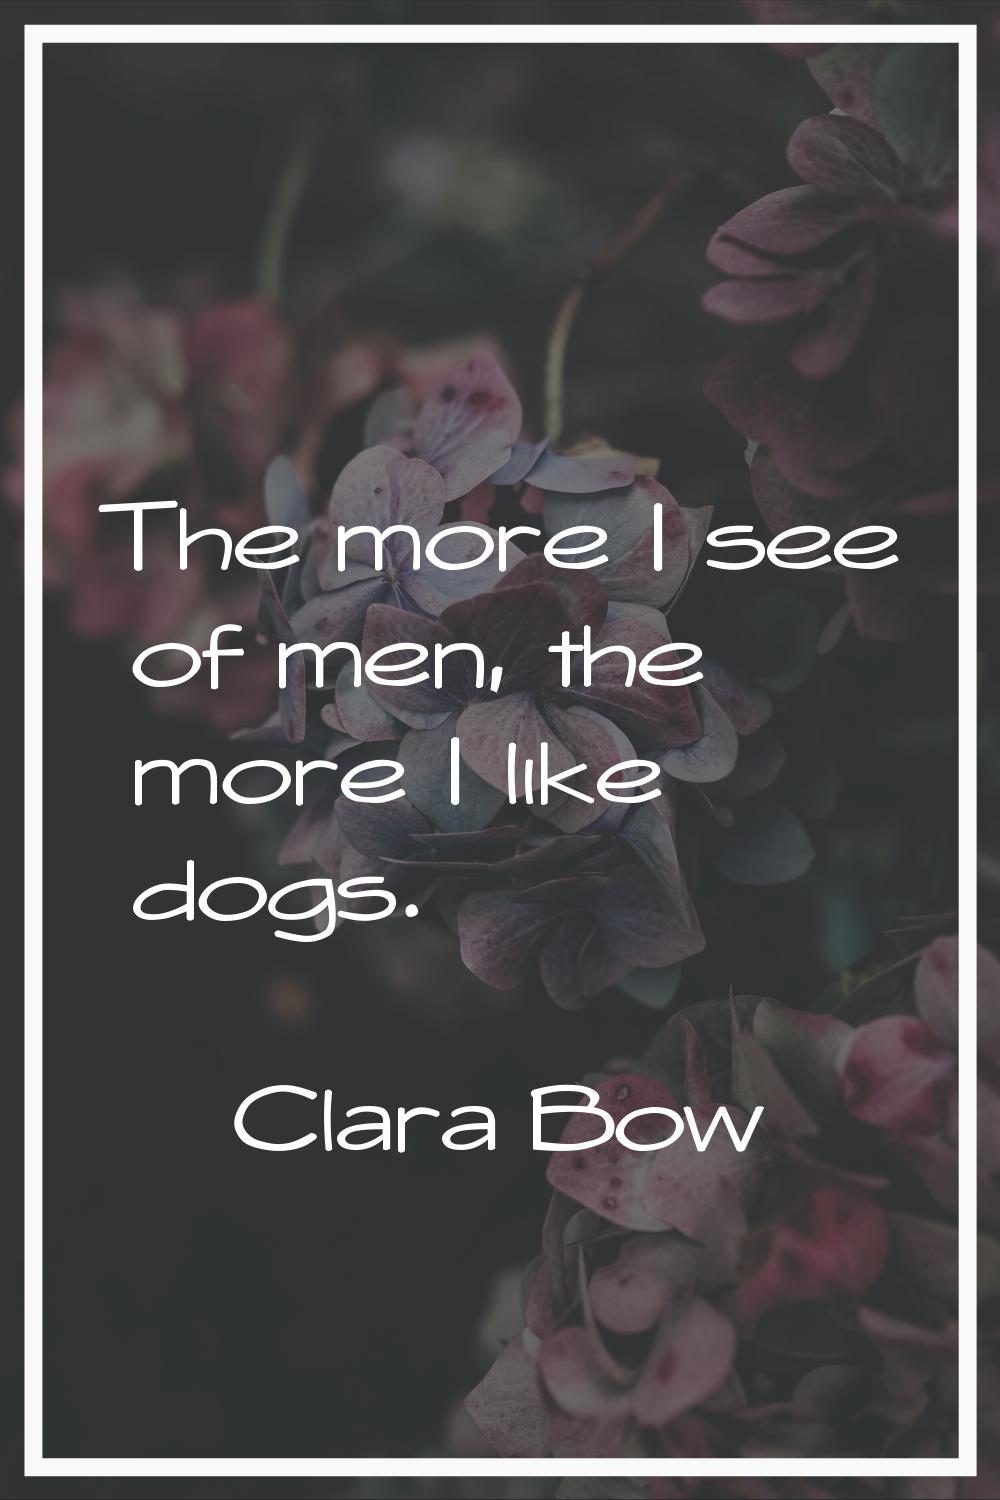 The more I see of men, the more I like dogs.